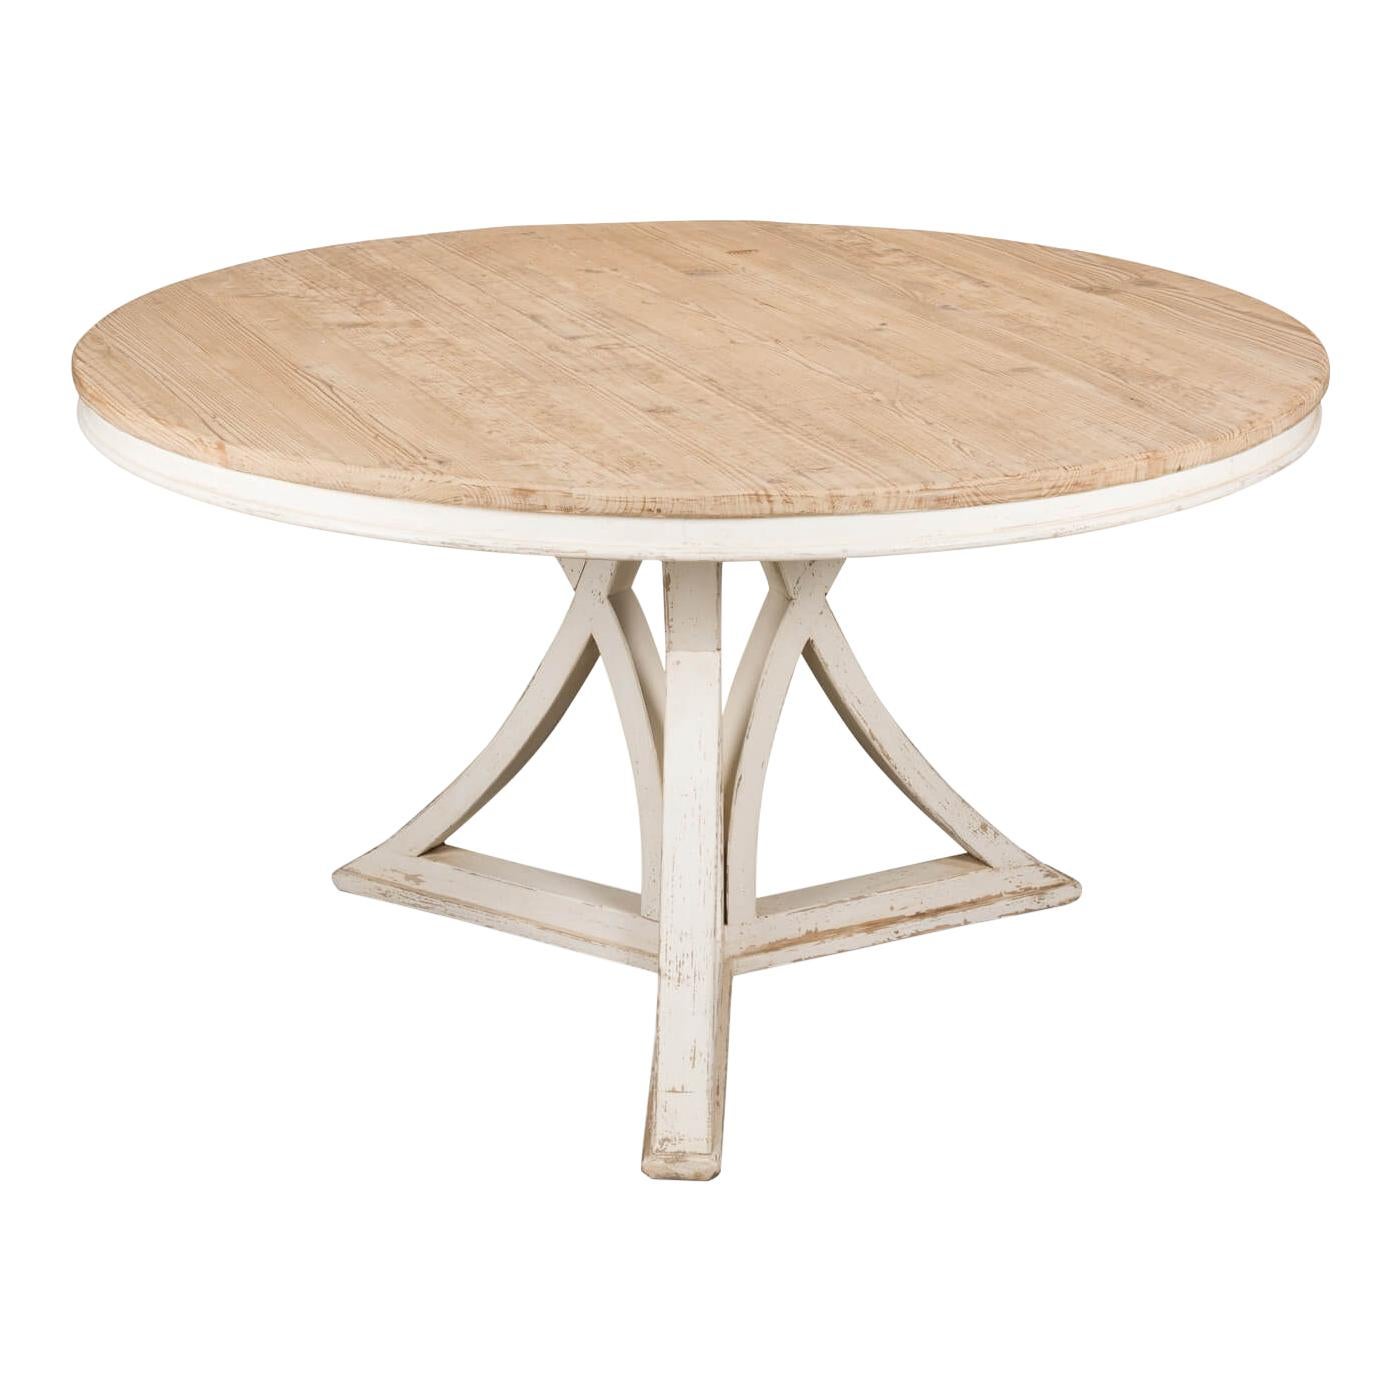 Modern Rustic Round Dining Table For Sale